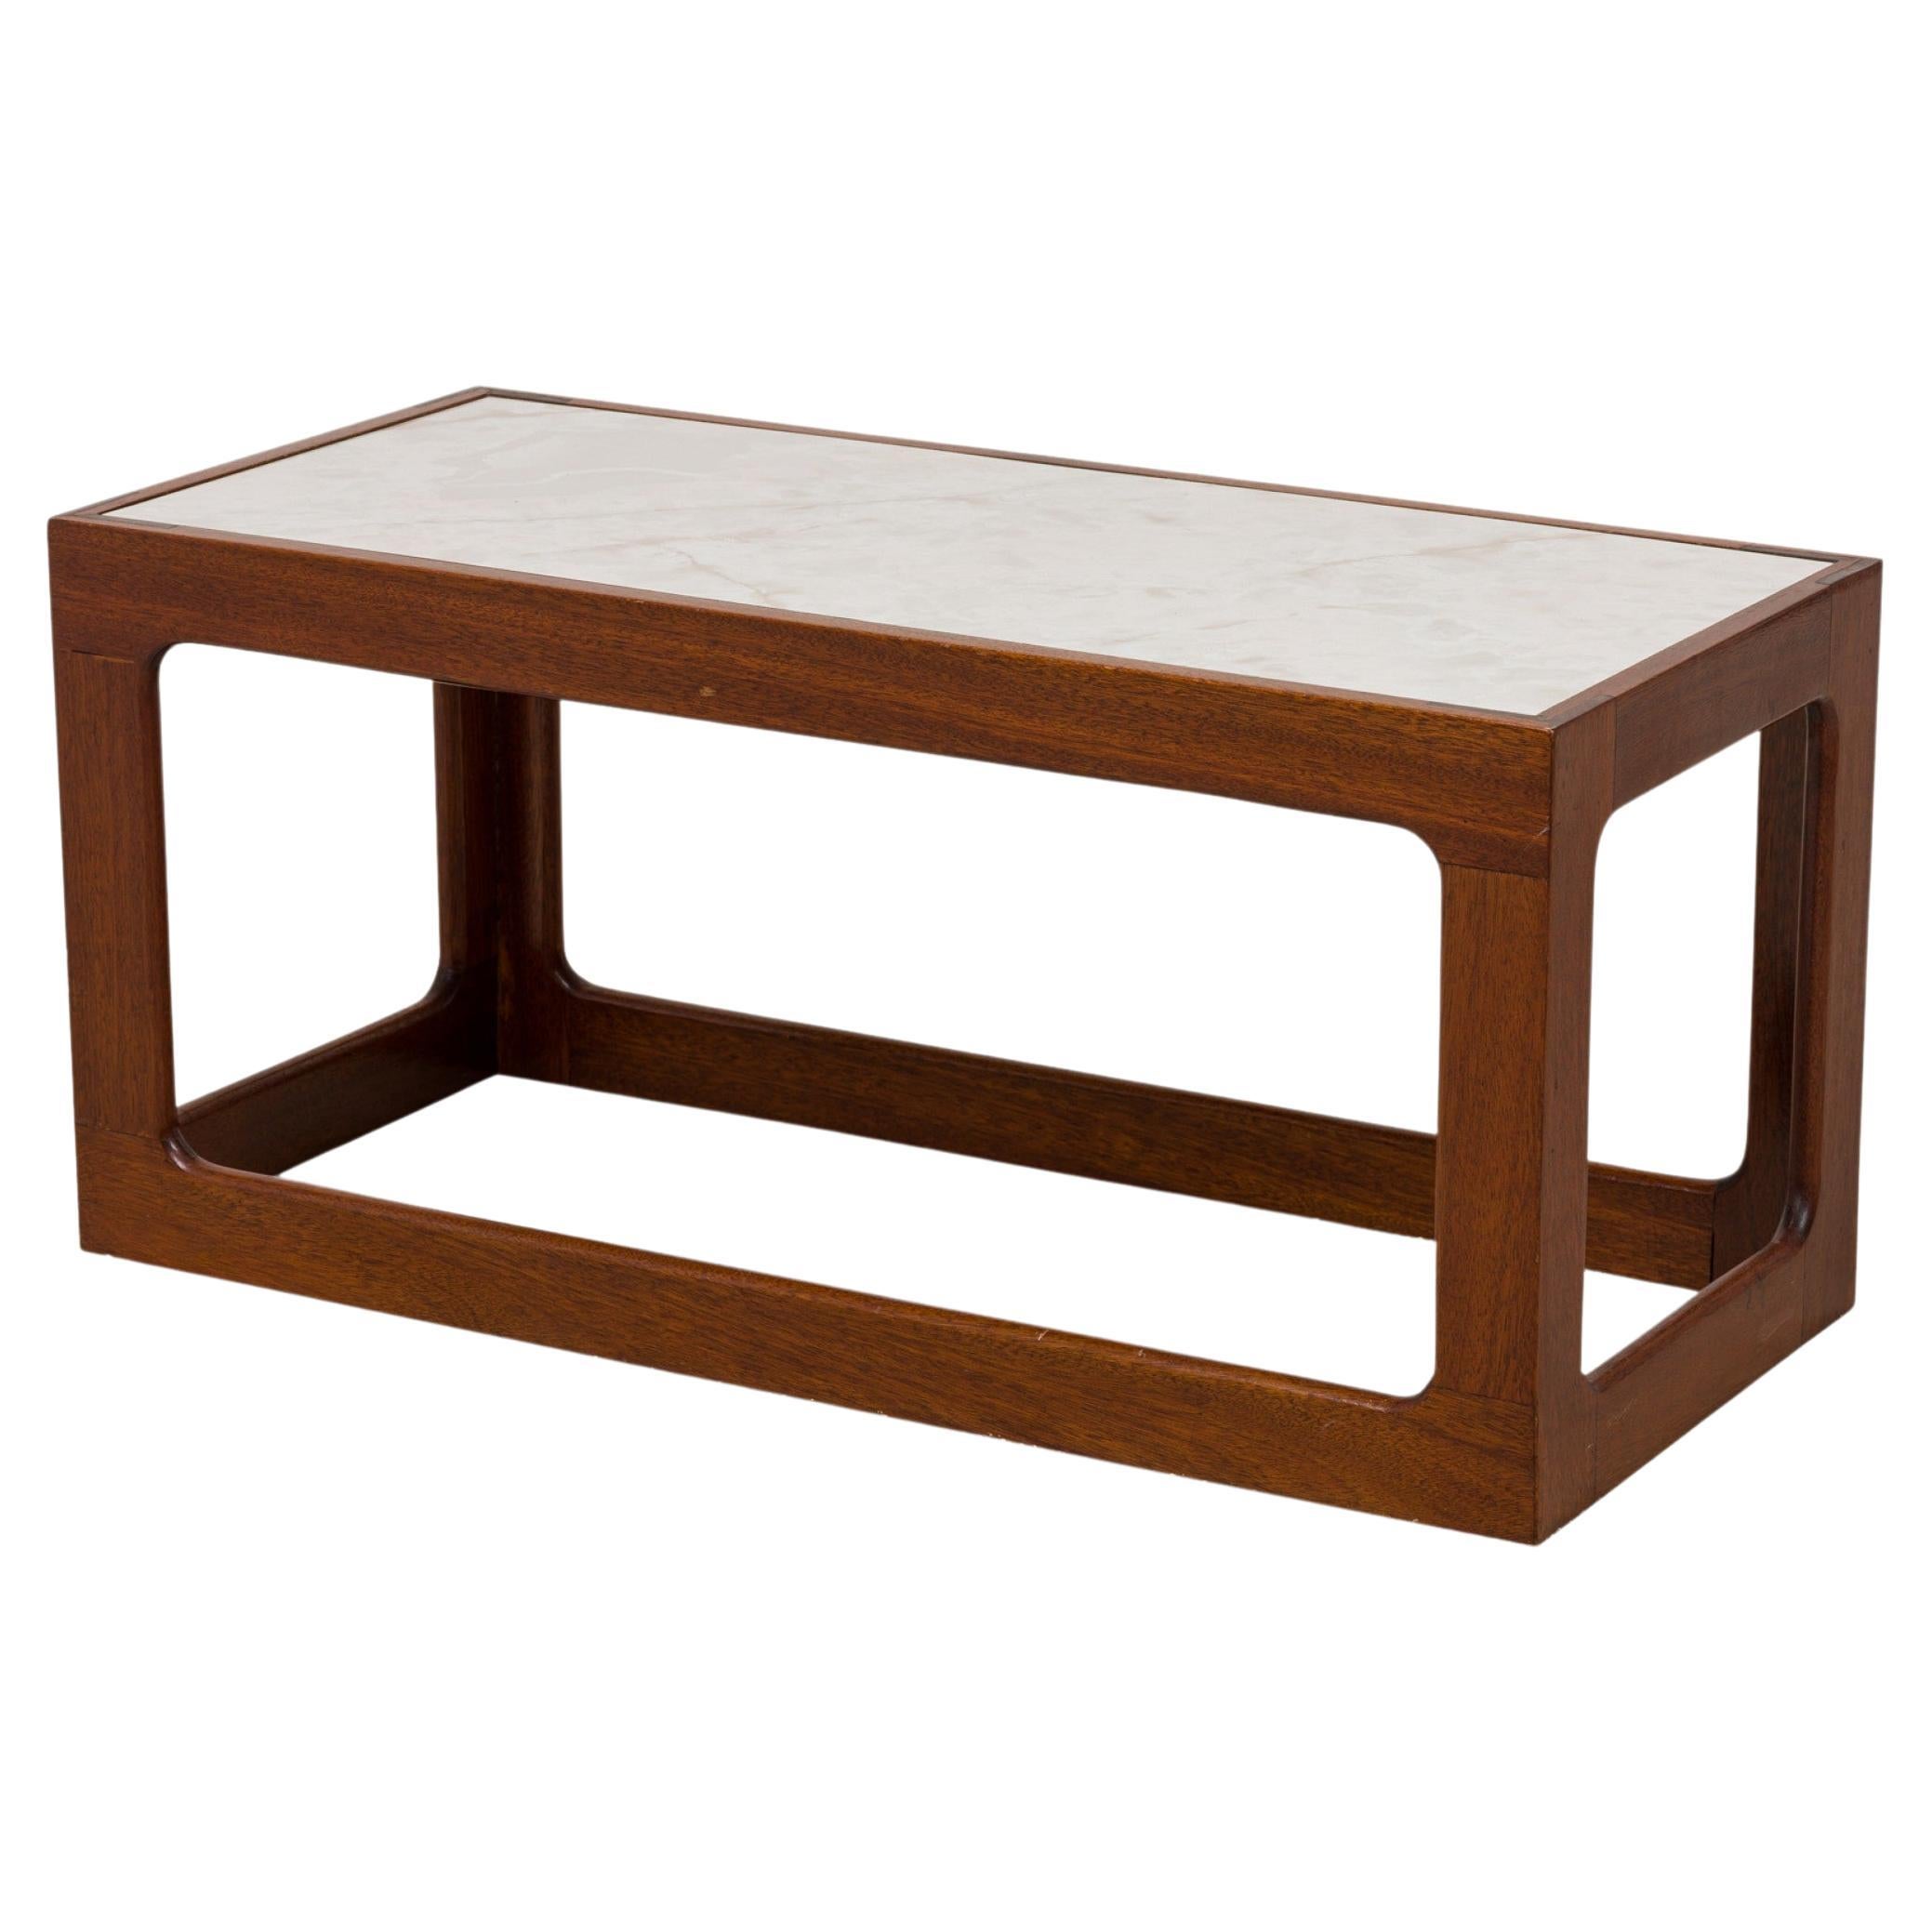 Adrian Pearsall Open Cube Wood and Faux White Marble Coffee / Cocktail Table